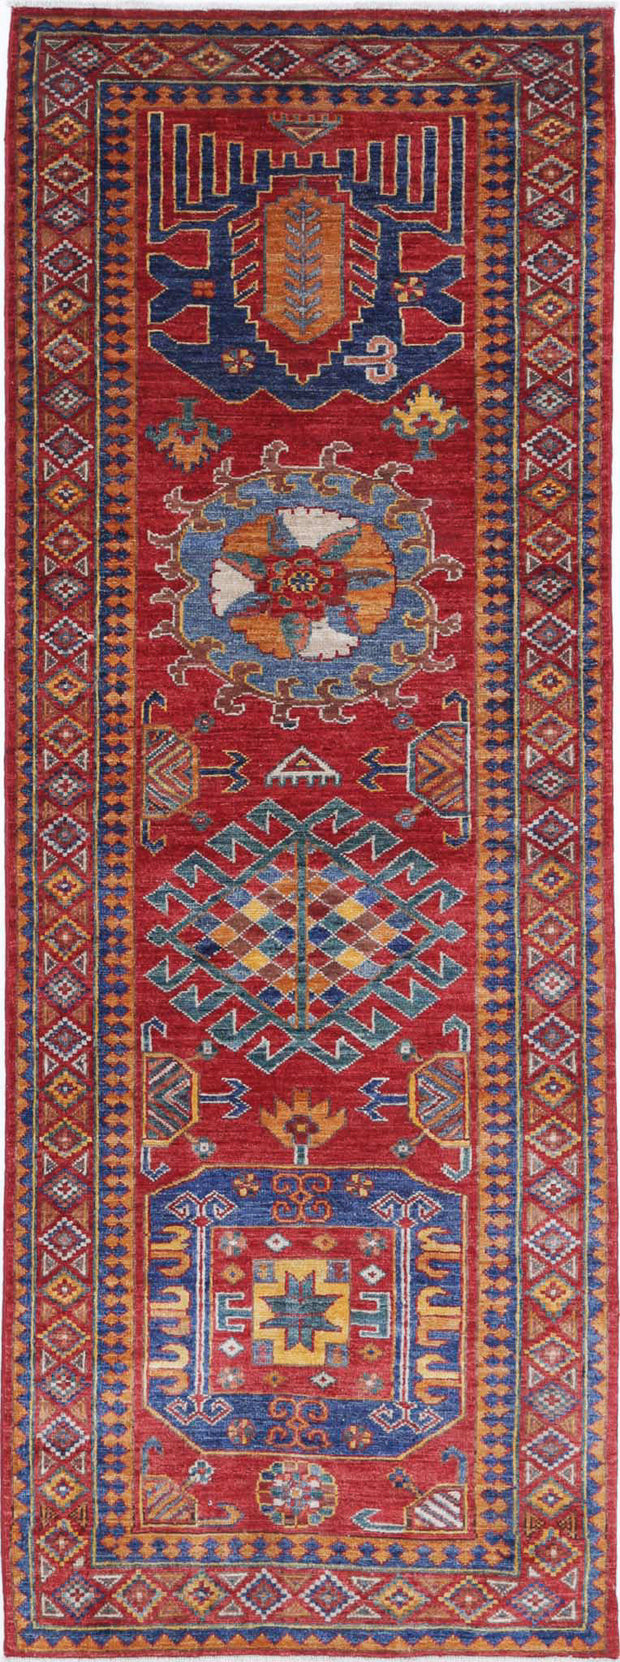 Hand Knotted Nomadic Caucasian Humna Wool Rug 2' 9" x 8' 0" - No. AT49390